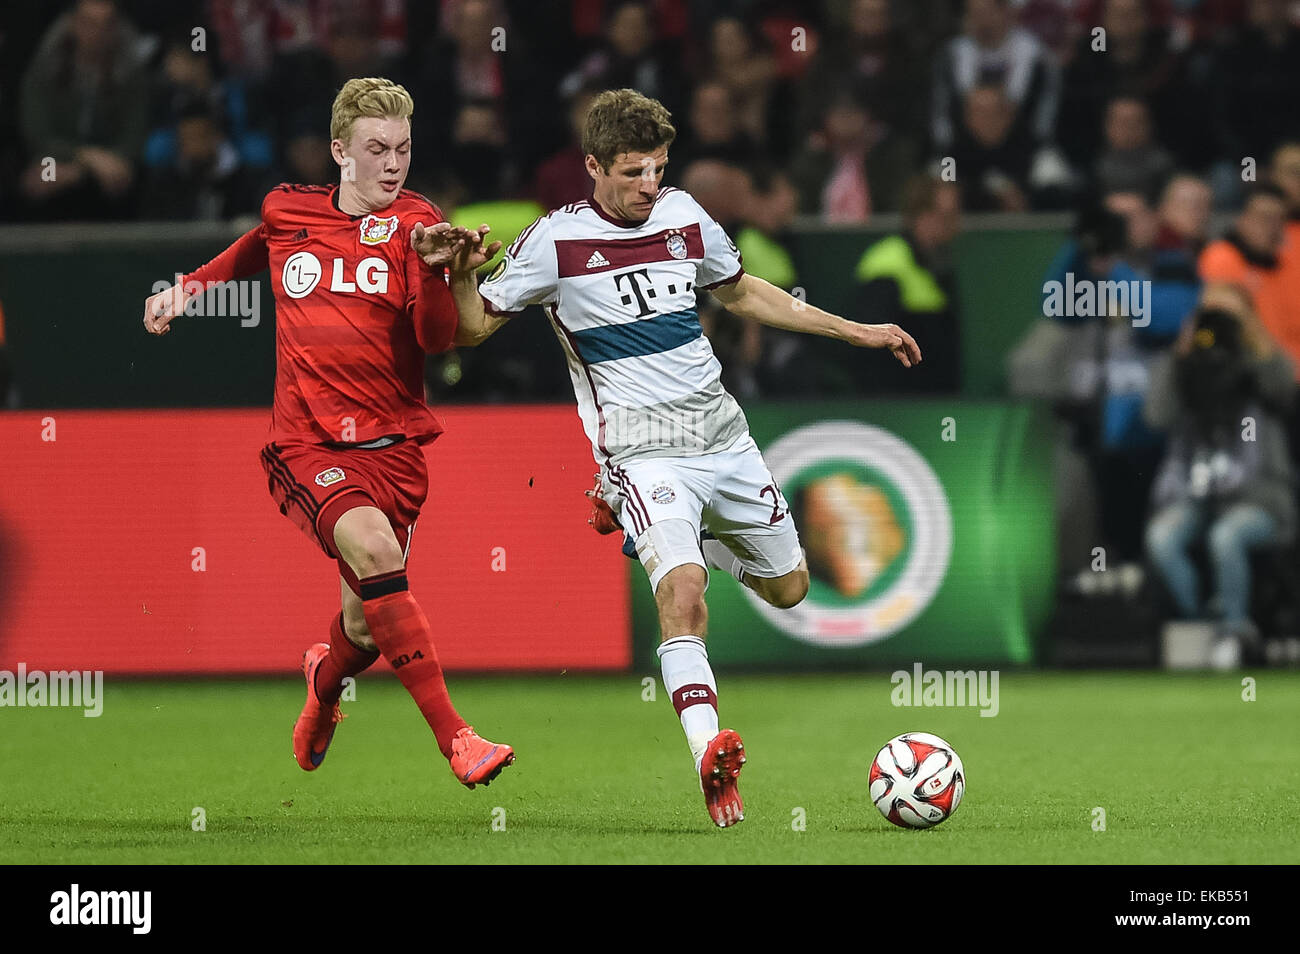 Munich's Thomas Müller (R) and Leverkusen's Julian Brandt in action during the German DFB Cup quarter final soccer match between Bayer Leverkusen and Bayern Munich at the BayArena in Leverkusen, Germany, 08 April 2015. (ATTENTION: The DFB prohibits the utilisation and publication of sequential pictures on the internet and other online media during the match (including half-time). ATTENTION: BLOCKING PERIOD! The DFB permits the further utilisation and publication of the pictures for mobile services (especially MMS) and for DVB-H and DMB only after the end of the match.) Photo: Maja Hitij/dpa Stock Photo